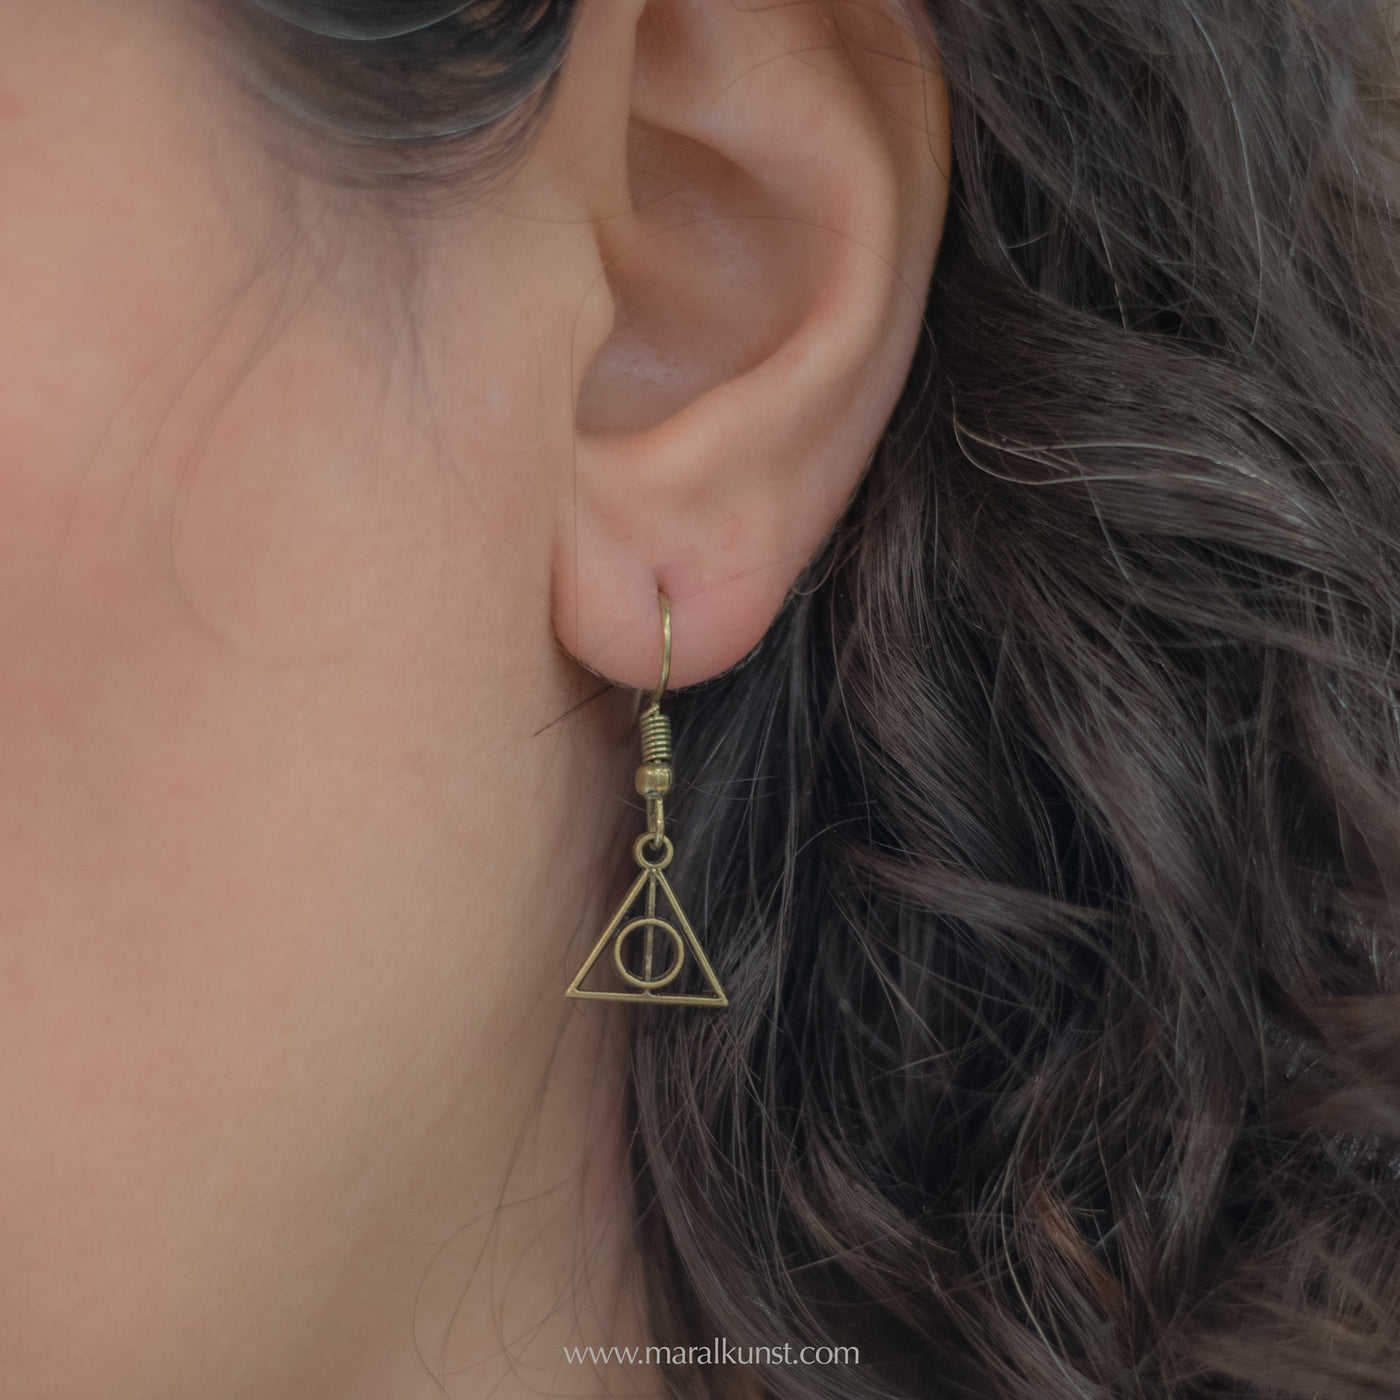 Harry Potter's Deathly Hallows earrings